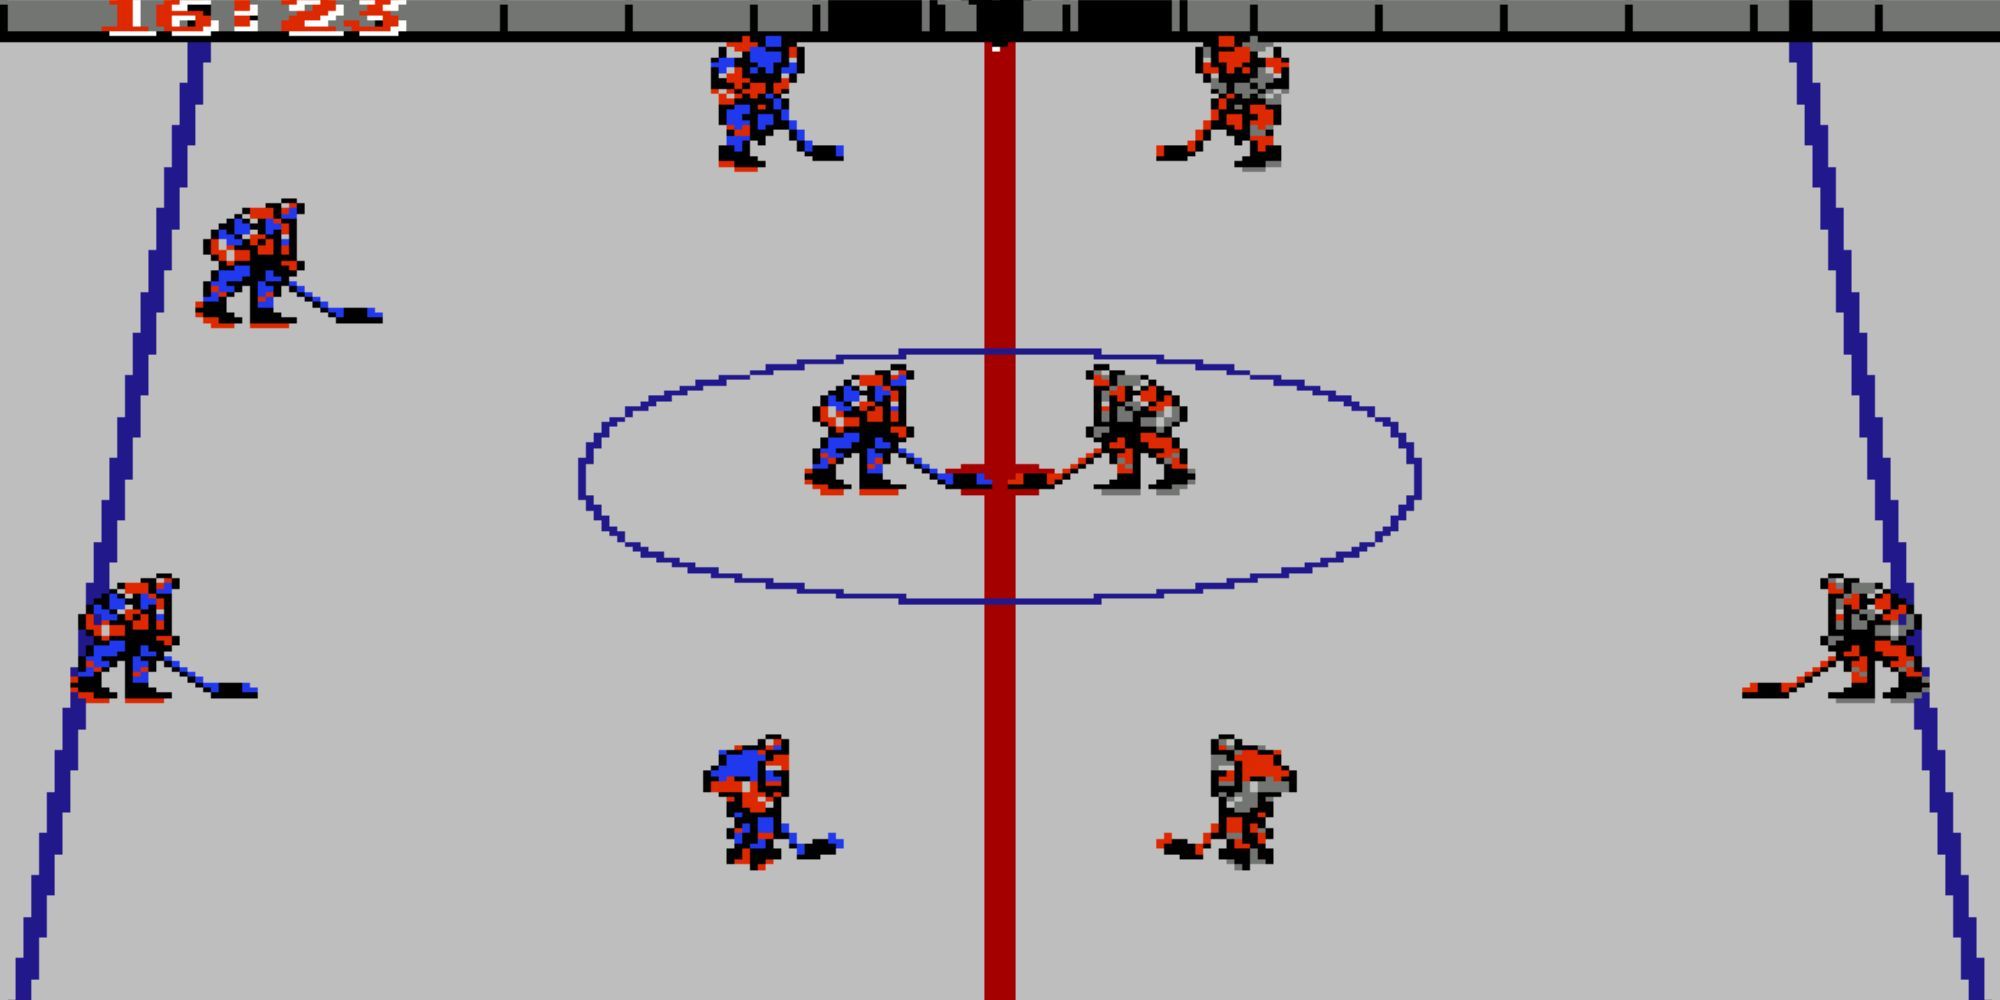 Two hockey teams face-off in the middle of the rink